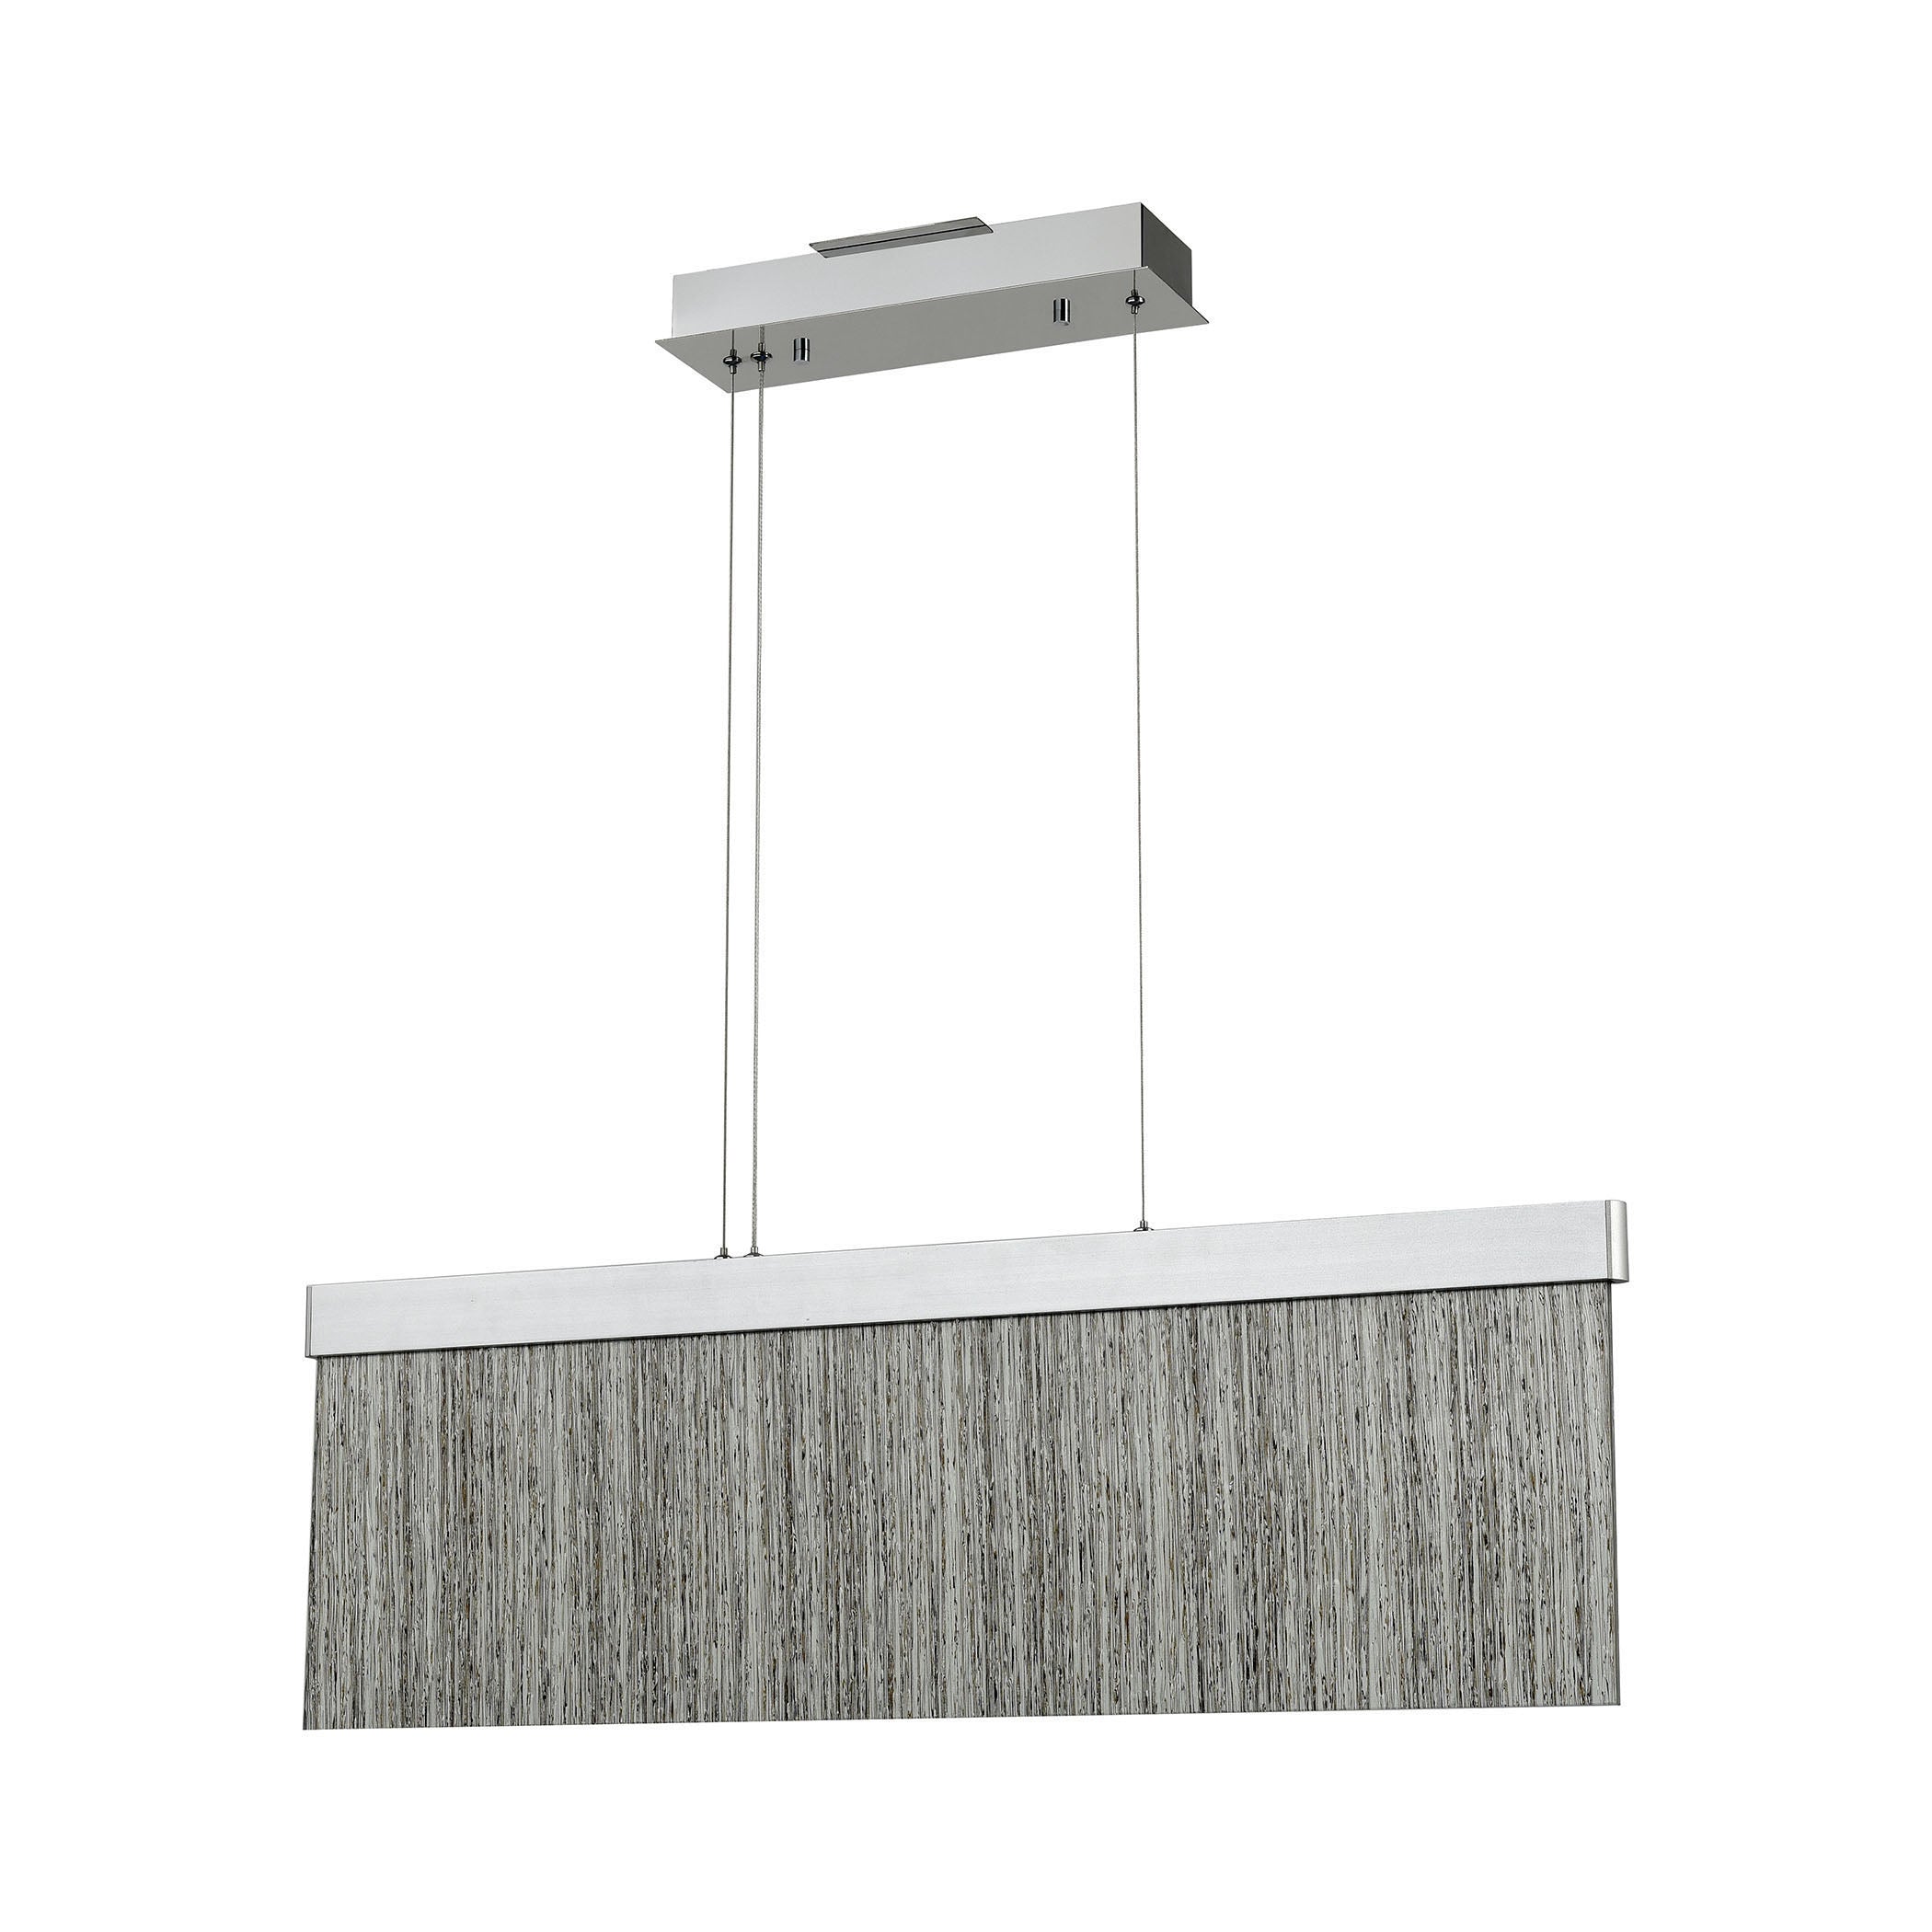 ELK Lighting 85112/LED Meadowland 1-Light Island Light in Satin Aluminum and Chrome with Textured Glass - Integrated LED